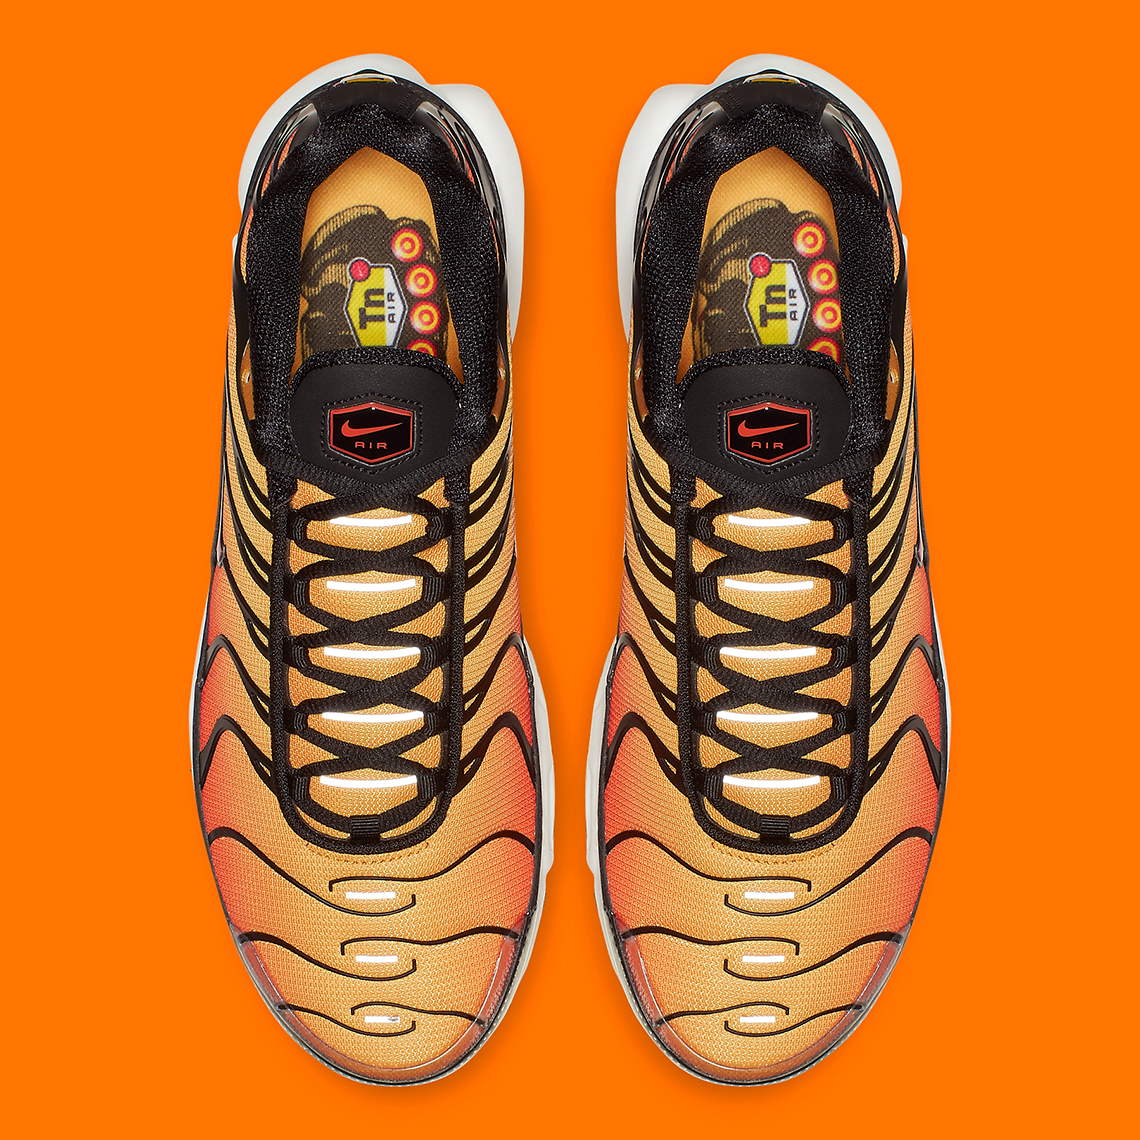 Nike Air Max Plus Og Sunset Hf0552 001 Release Date 3